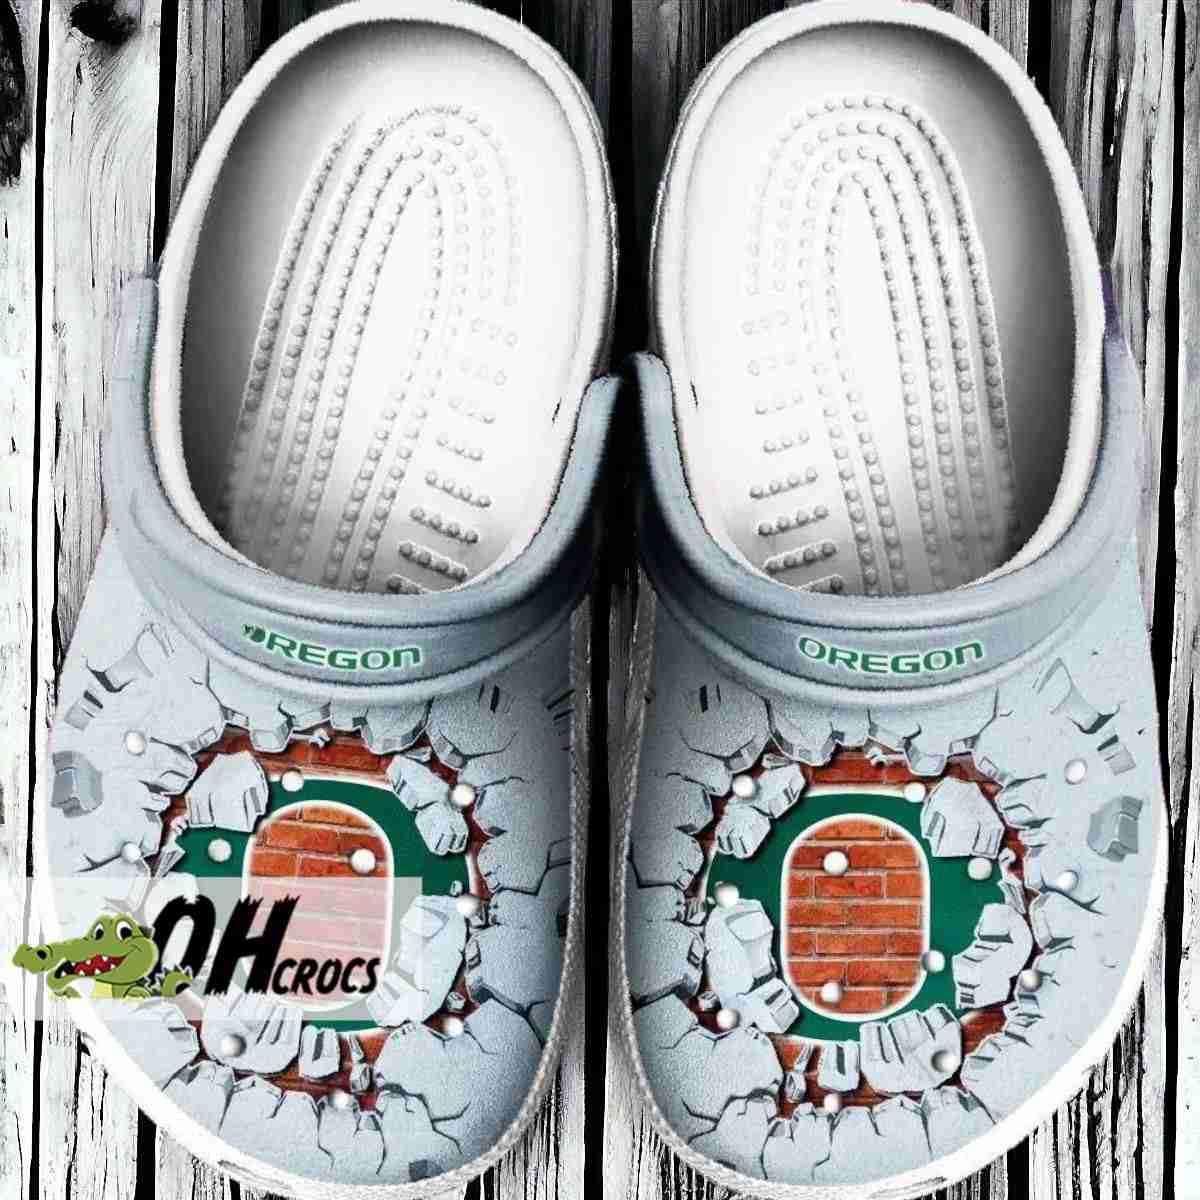 Oregon Game Day Crocs Shoes Gift